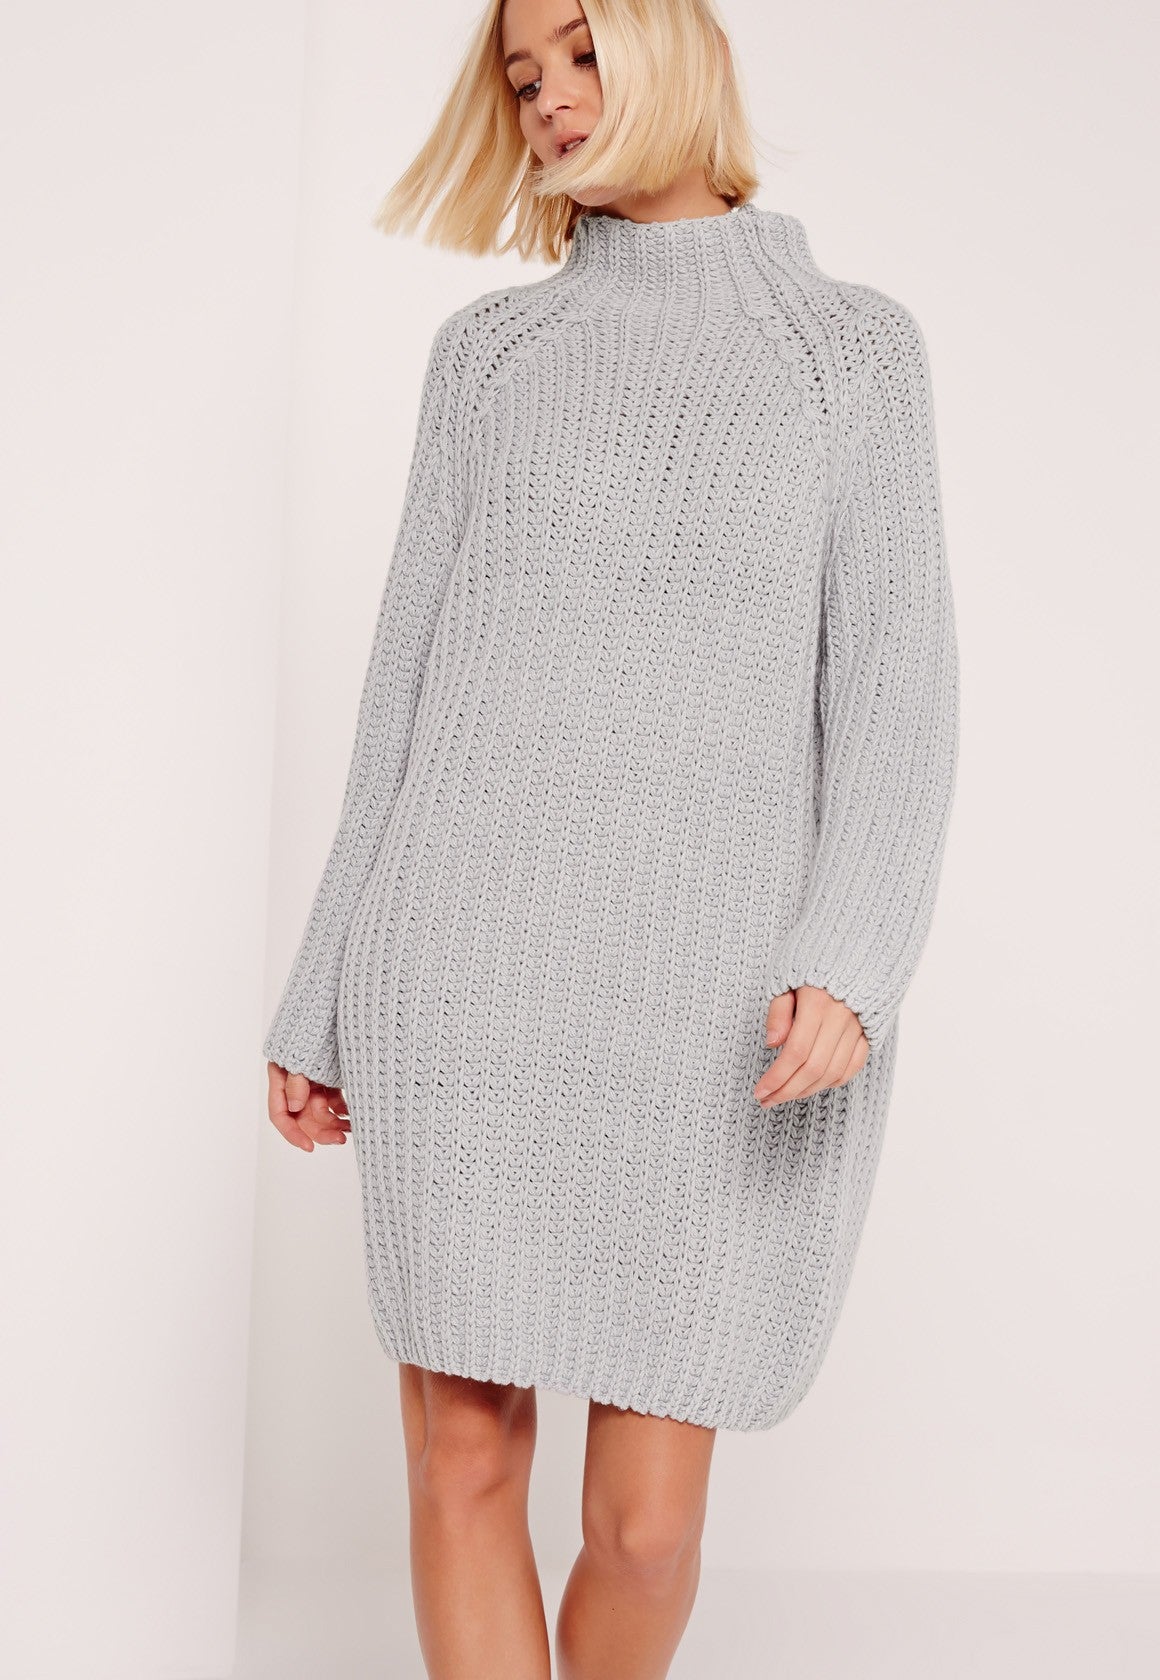 9 Celeb Inspired Sweater Dresses That'll Keep You Cozy and Cute | Essence